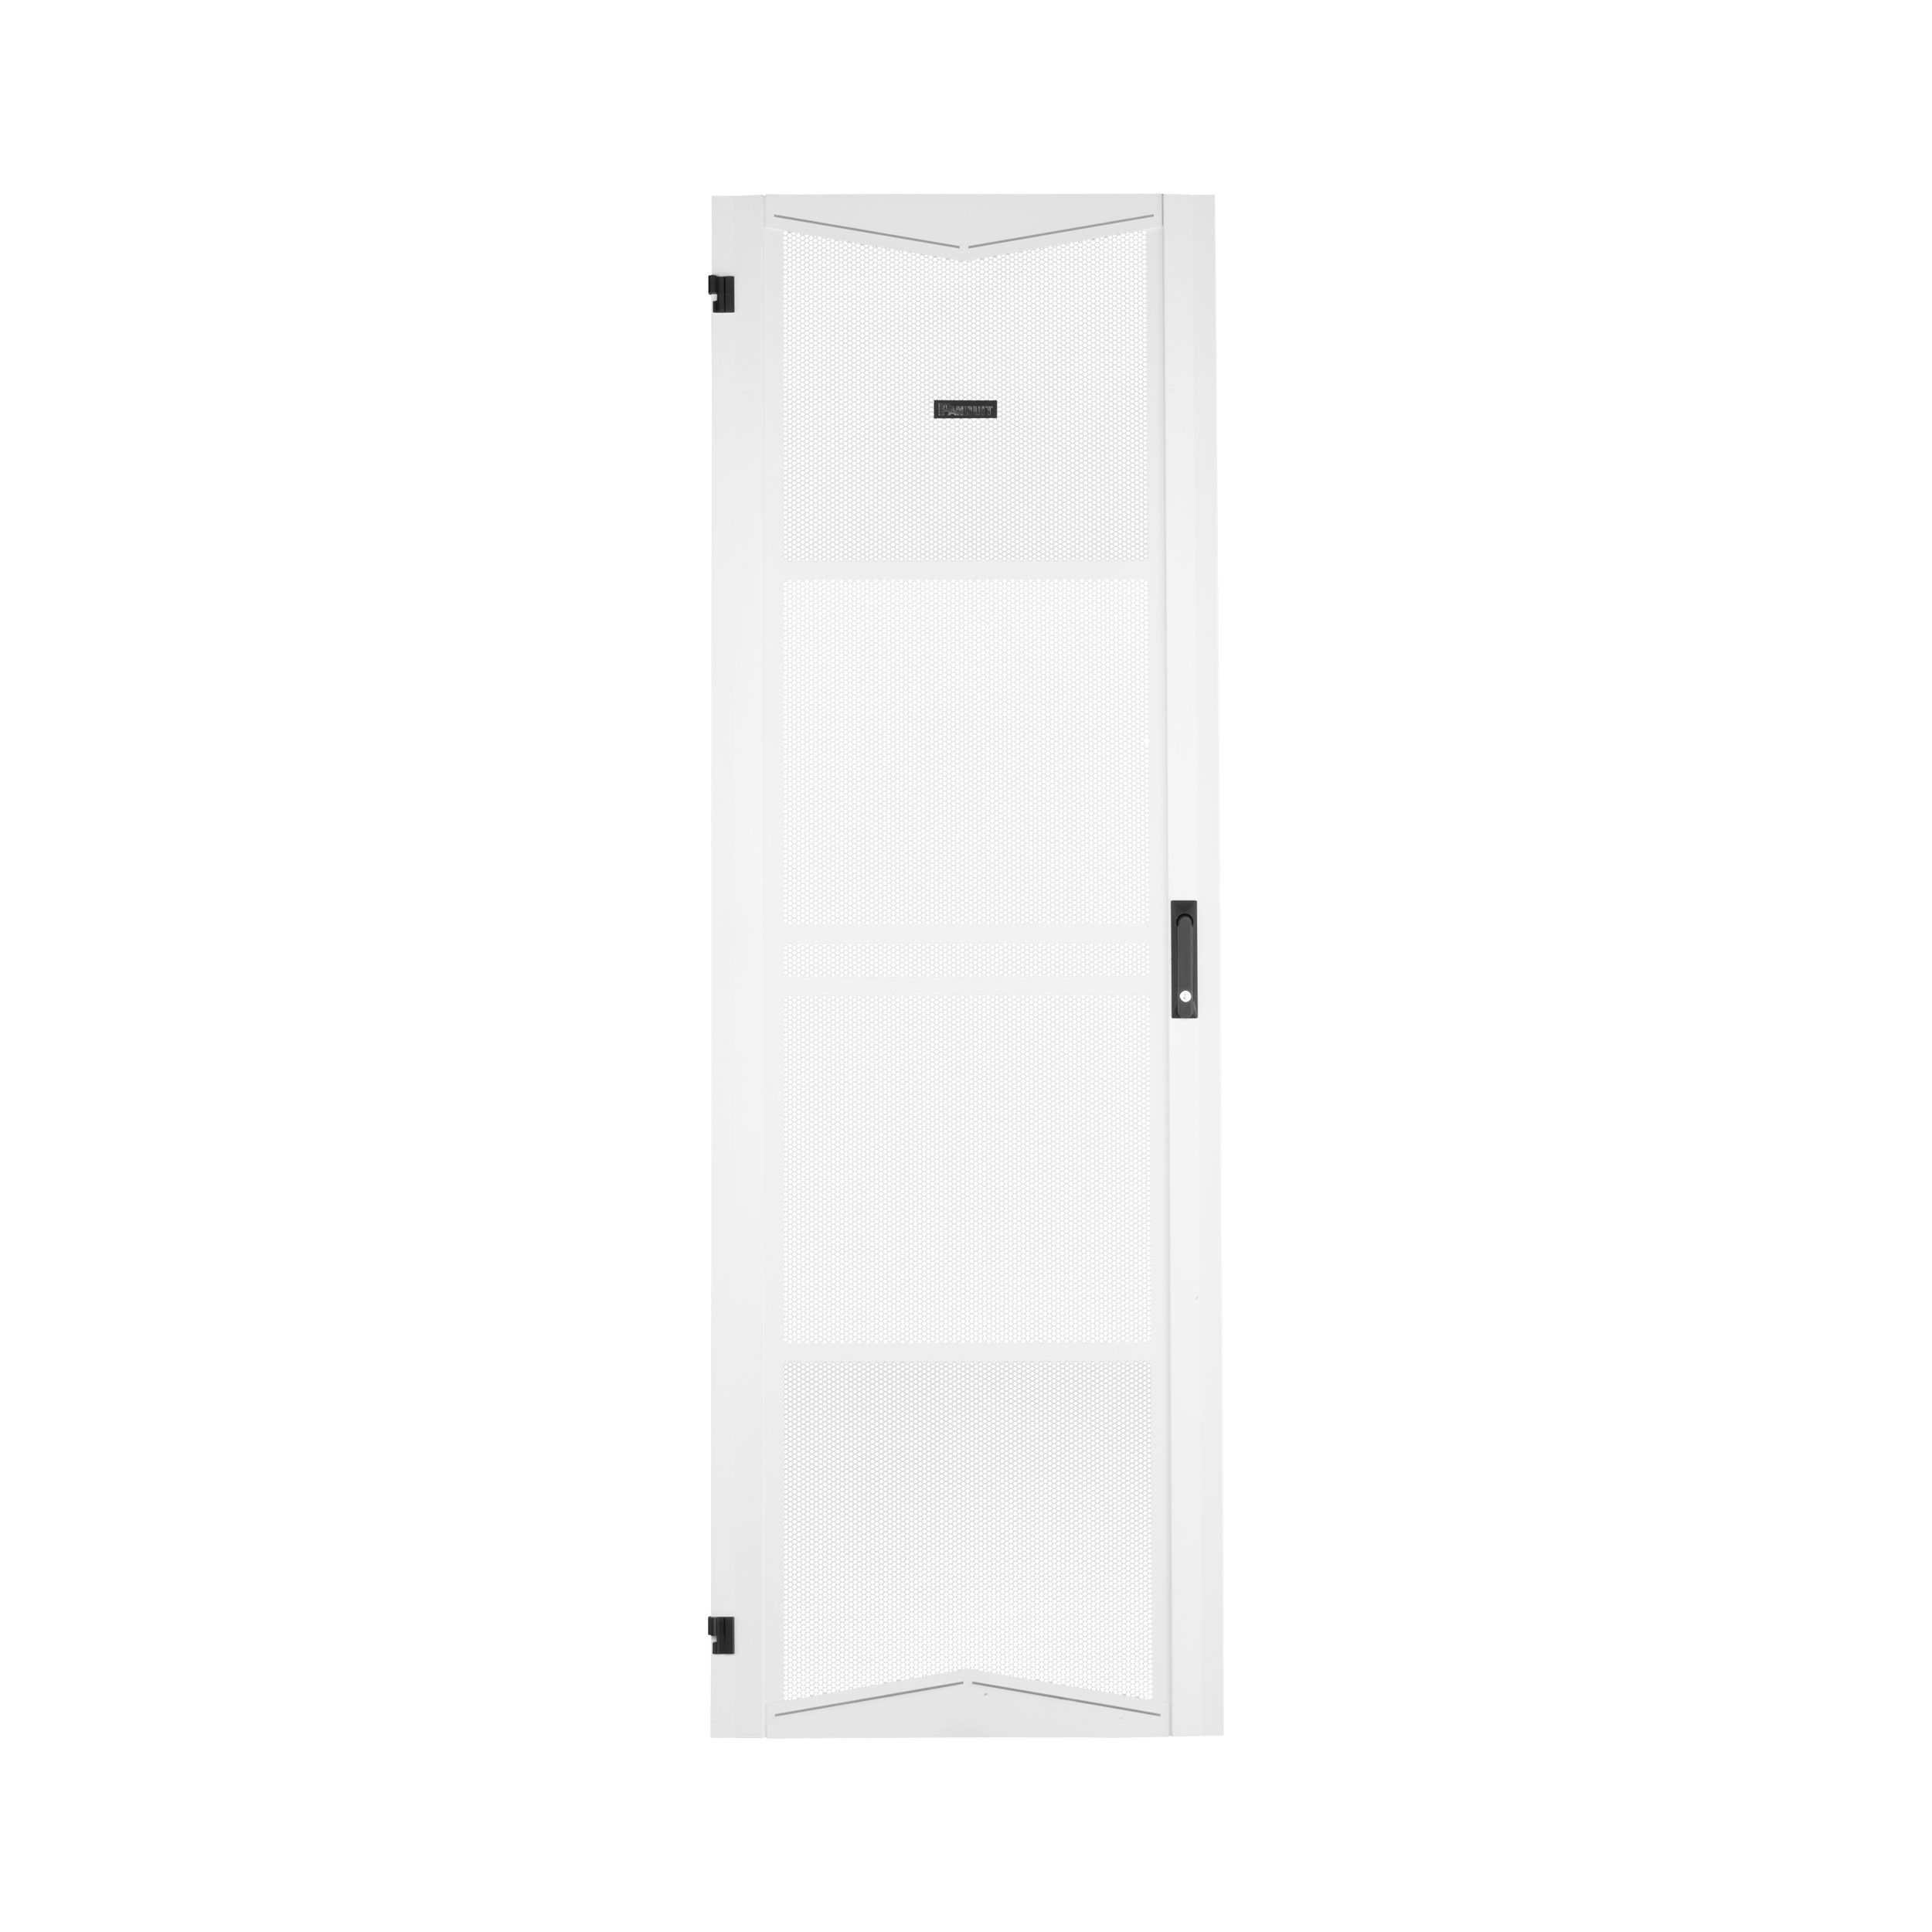 Single Hinged Door, Perforated, 600mmx48